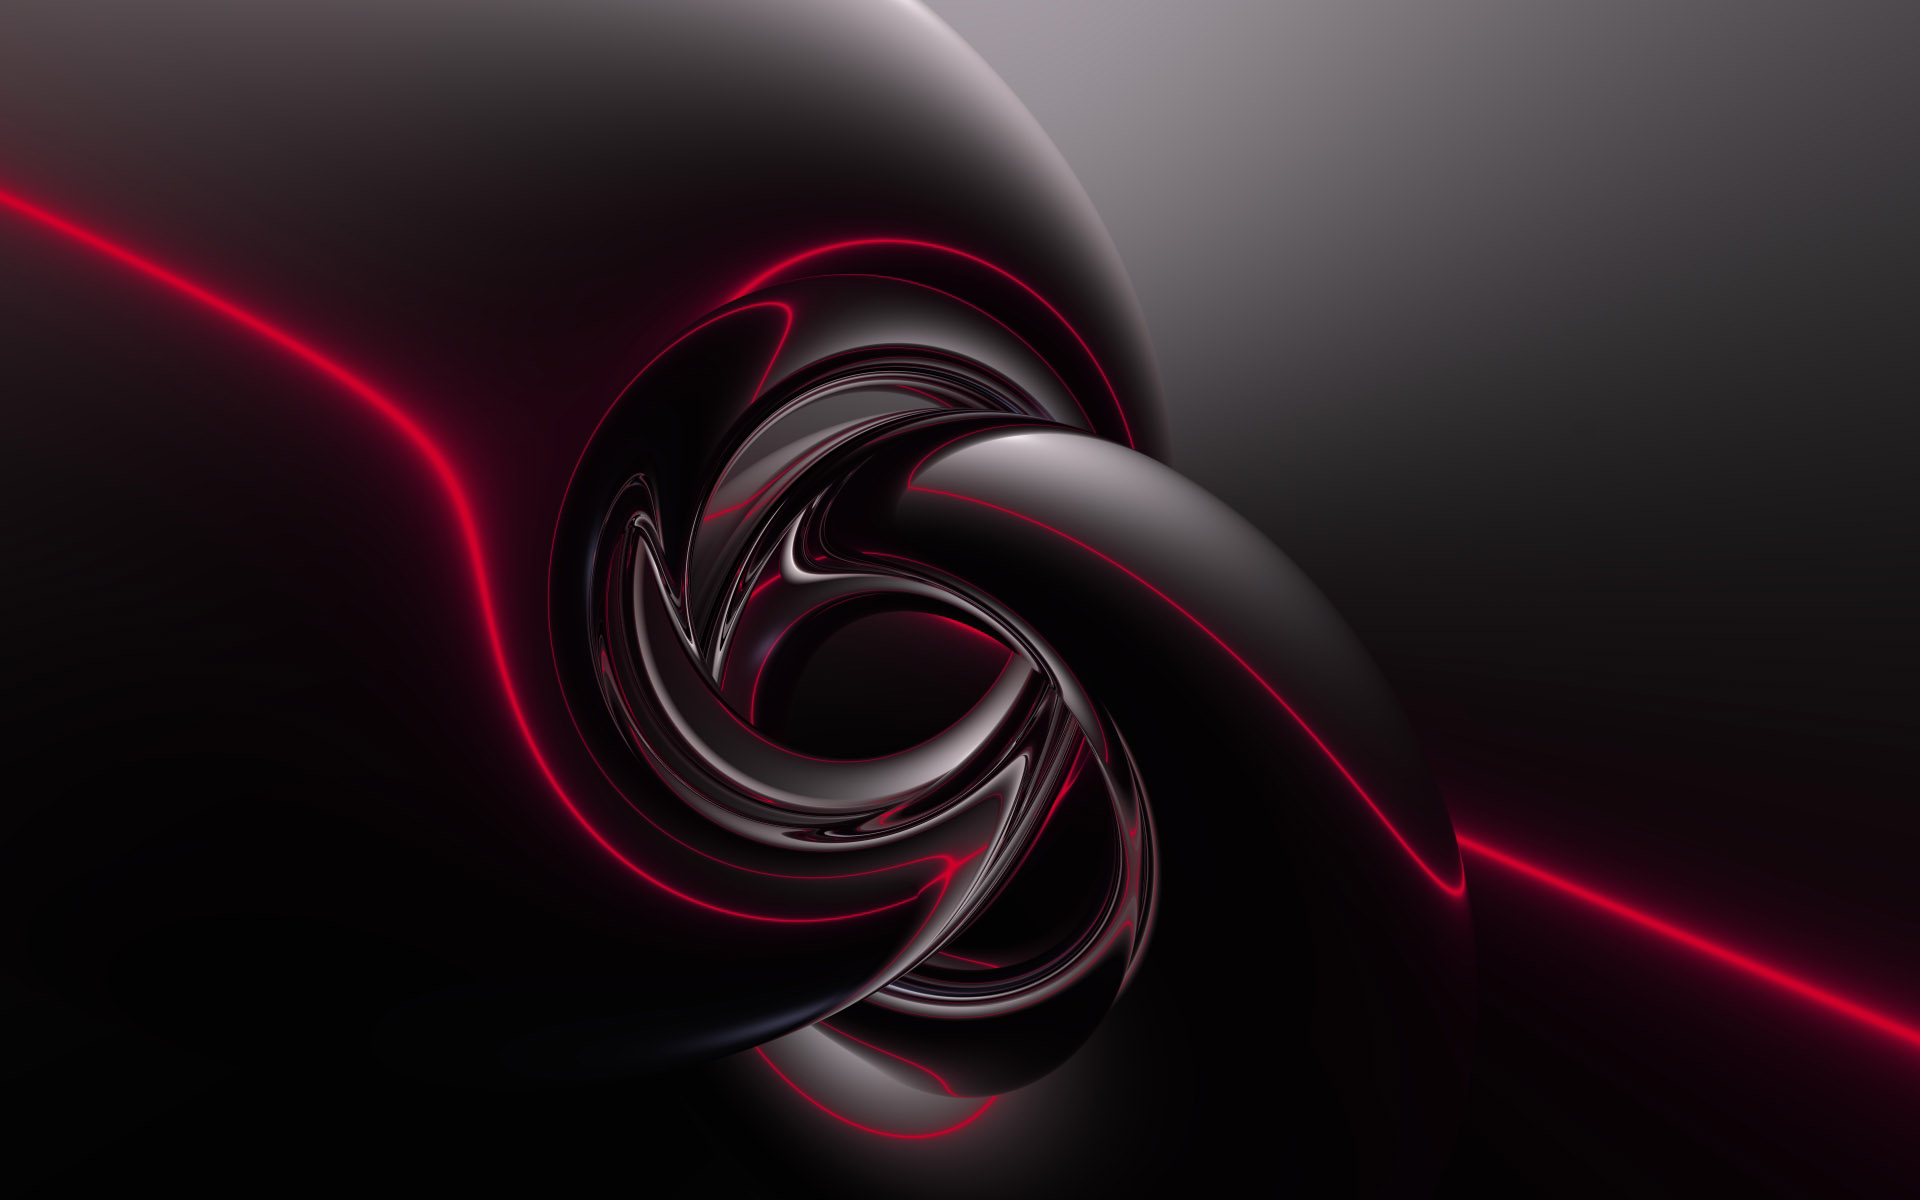 black and white abstract wallpaper,red,fractal art,purple,water,graphic design